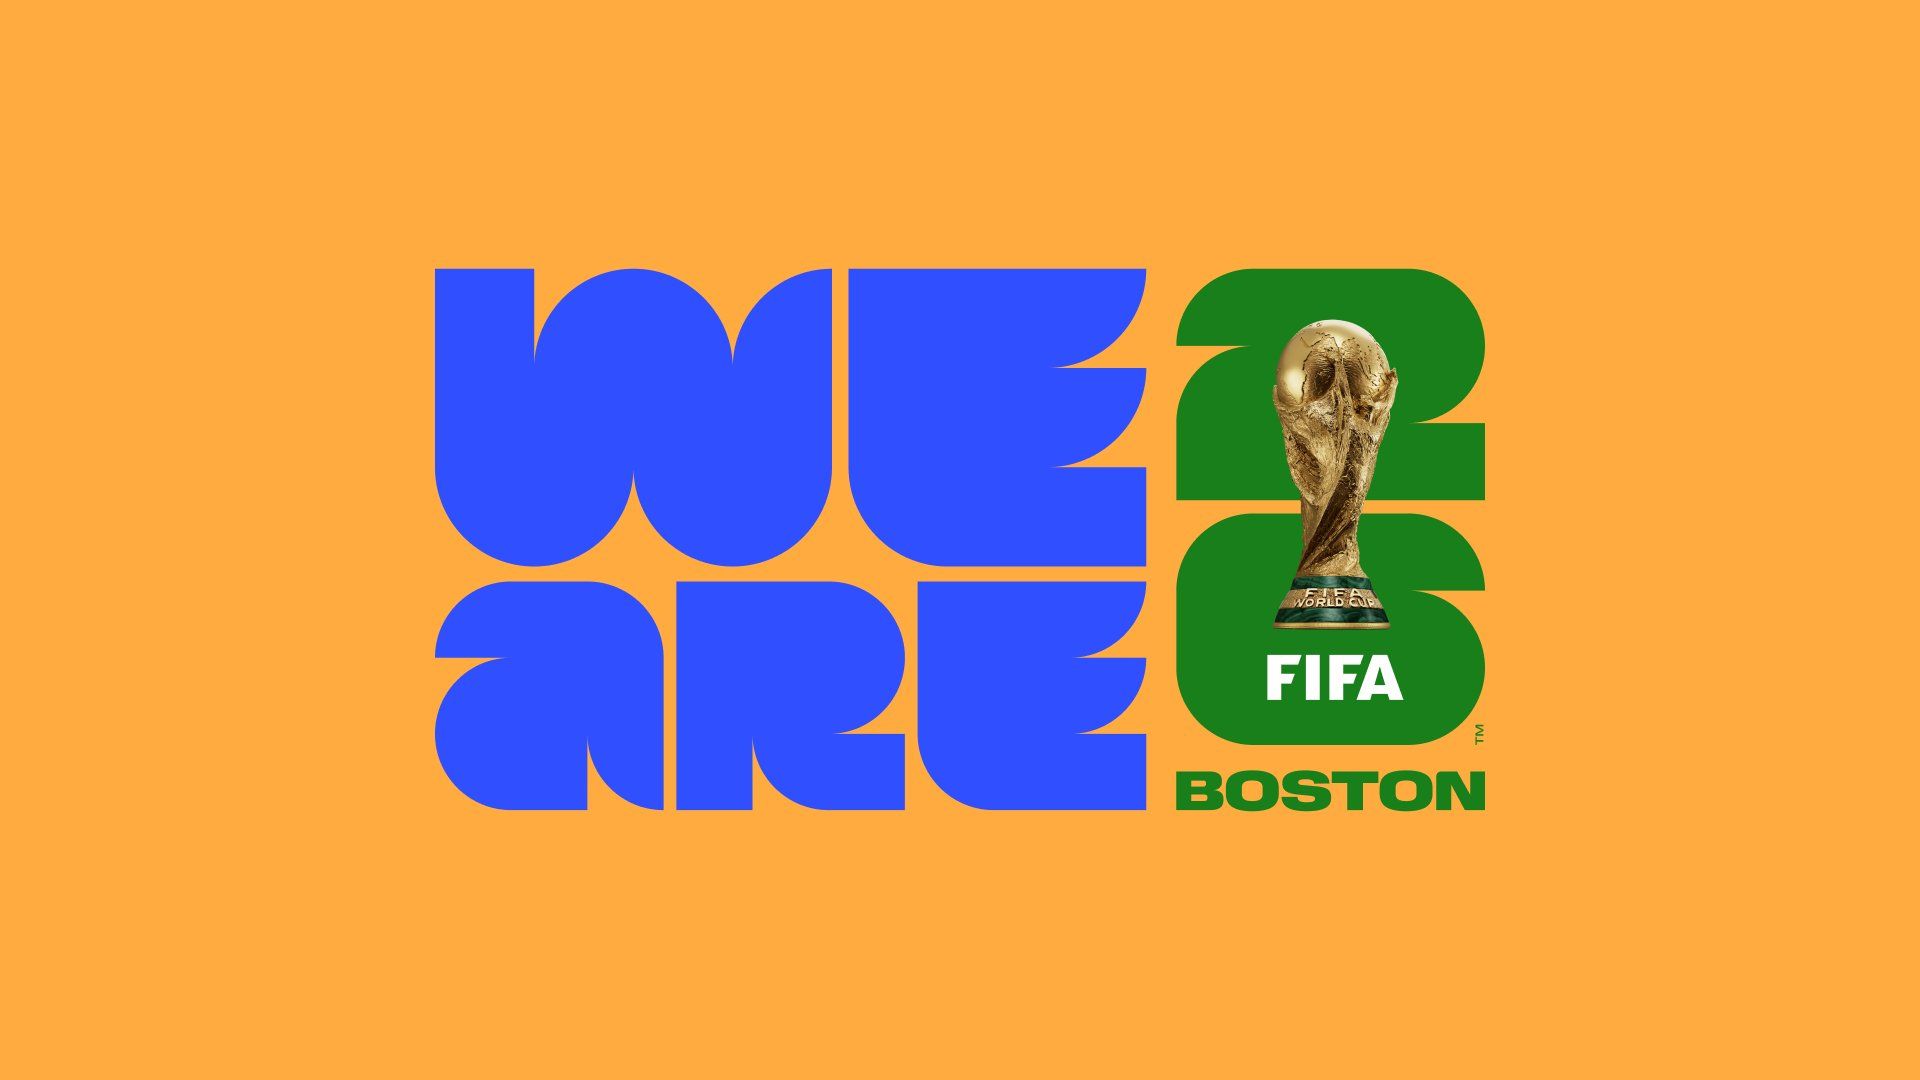 My logo design for the 2026 World Cup (Explanation in my comment) :  r/DigitalArt